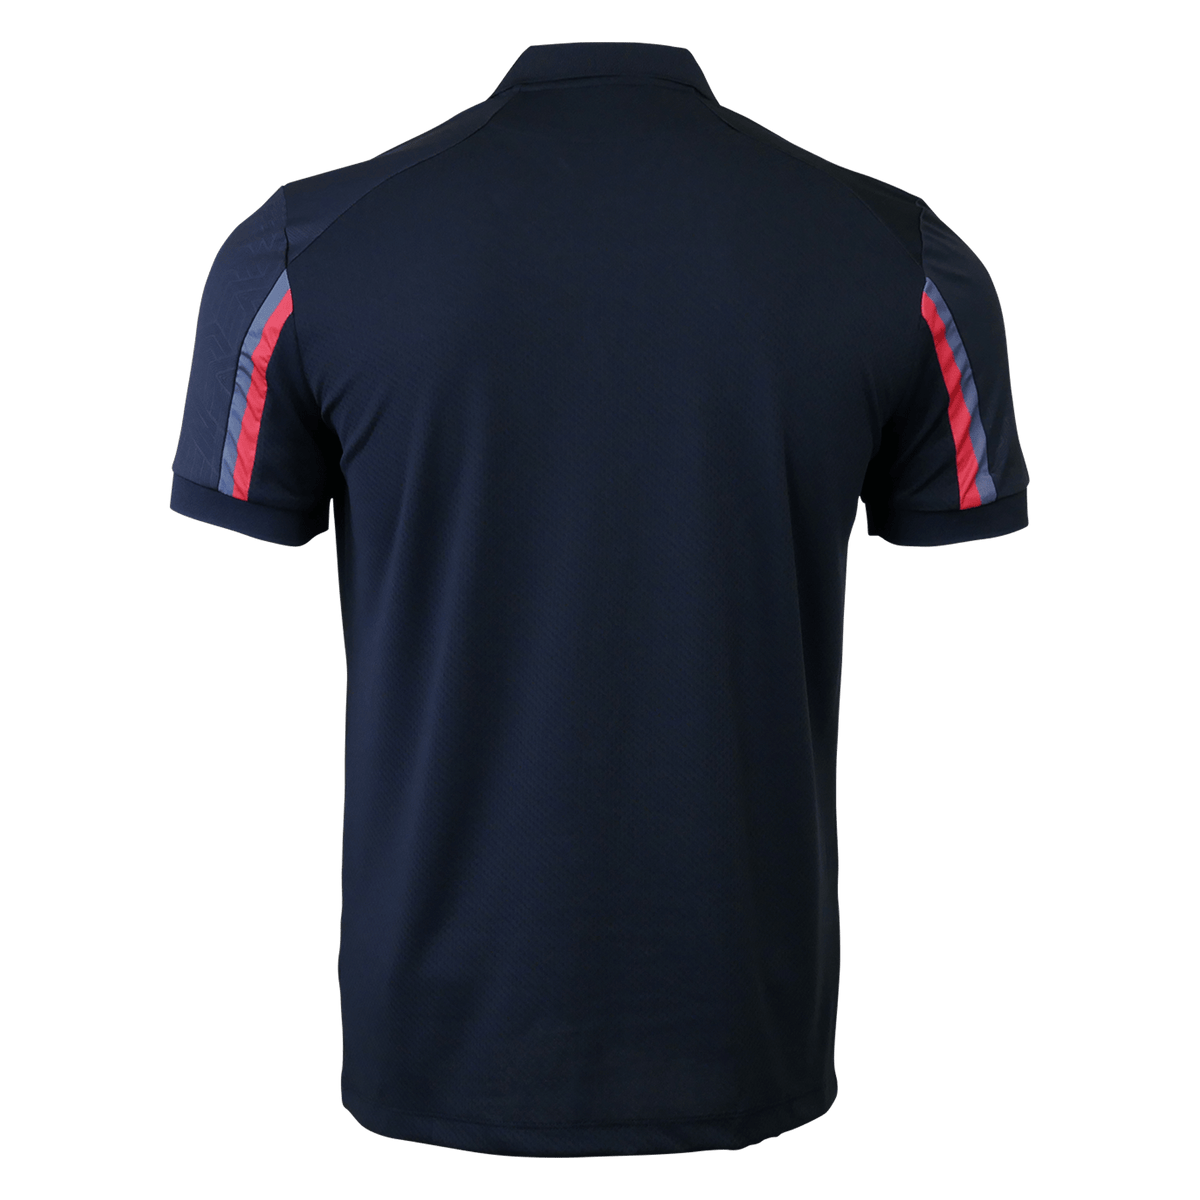 Wales Rugby Travel Polo 22/23 by Macron - World Rugby Shop